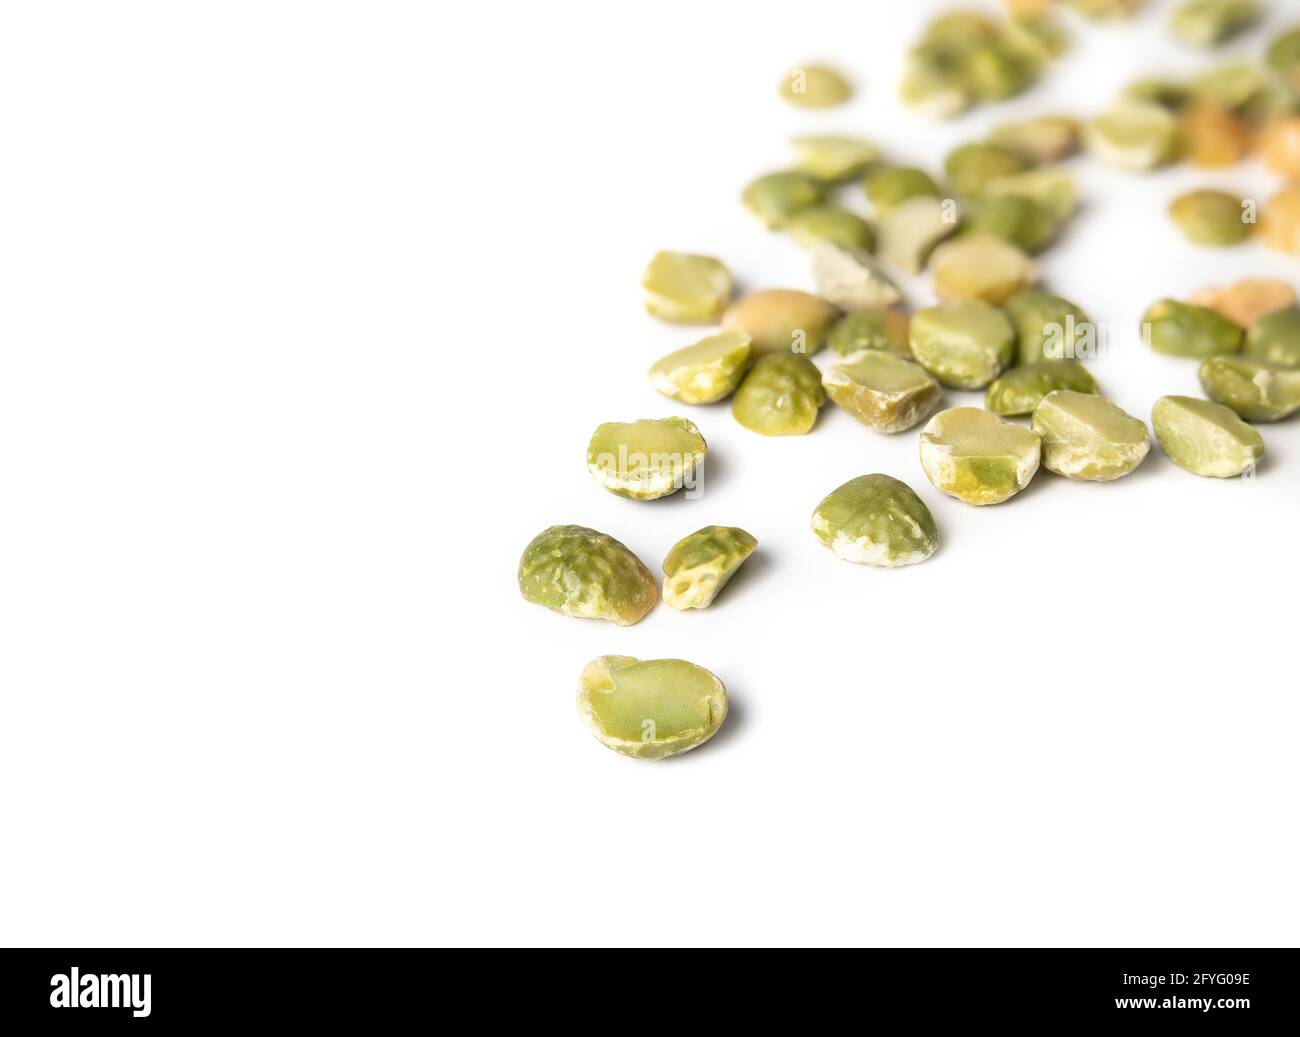 Dried green split peas, perspective view. Many half green field pea seeds randomly placed from top right to the center. Used in soups, dals, curries a Stock Photo